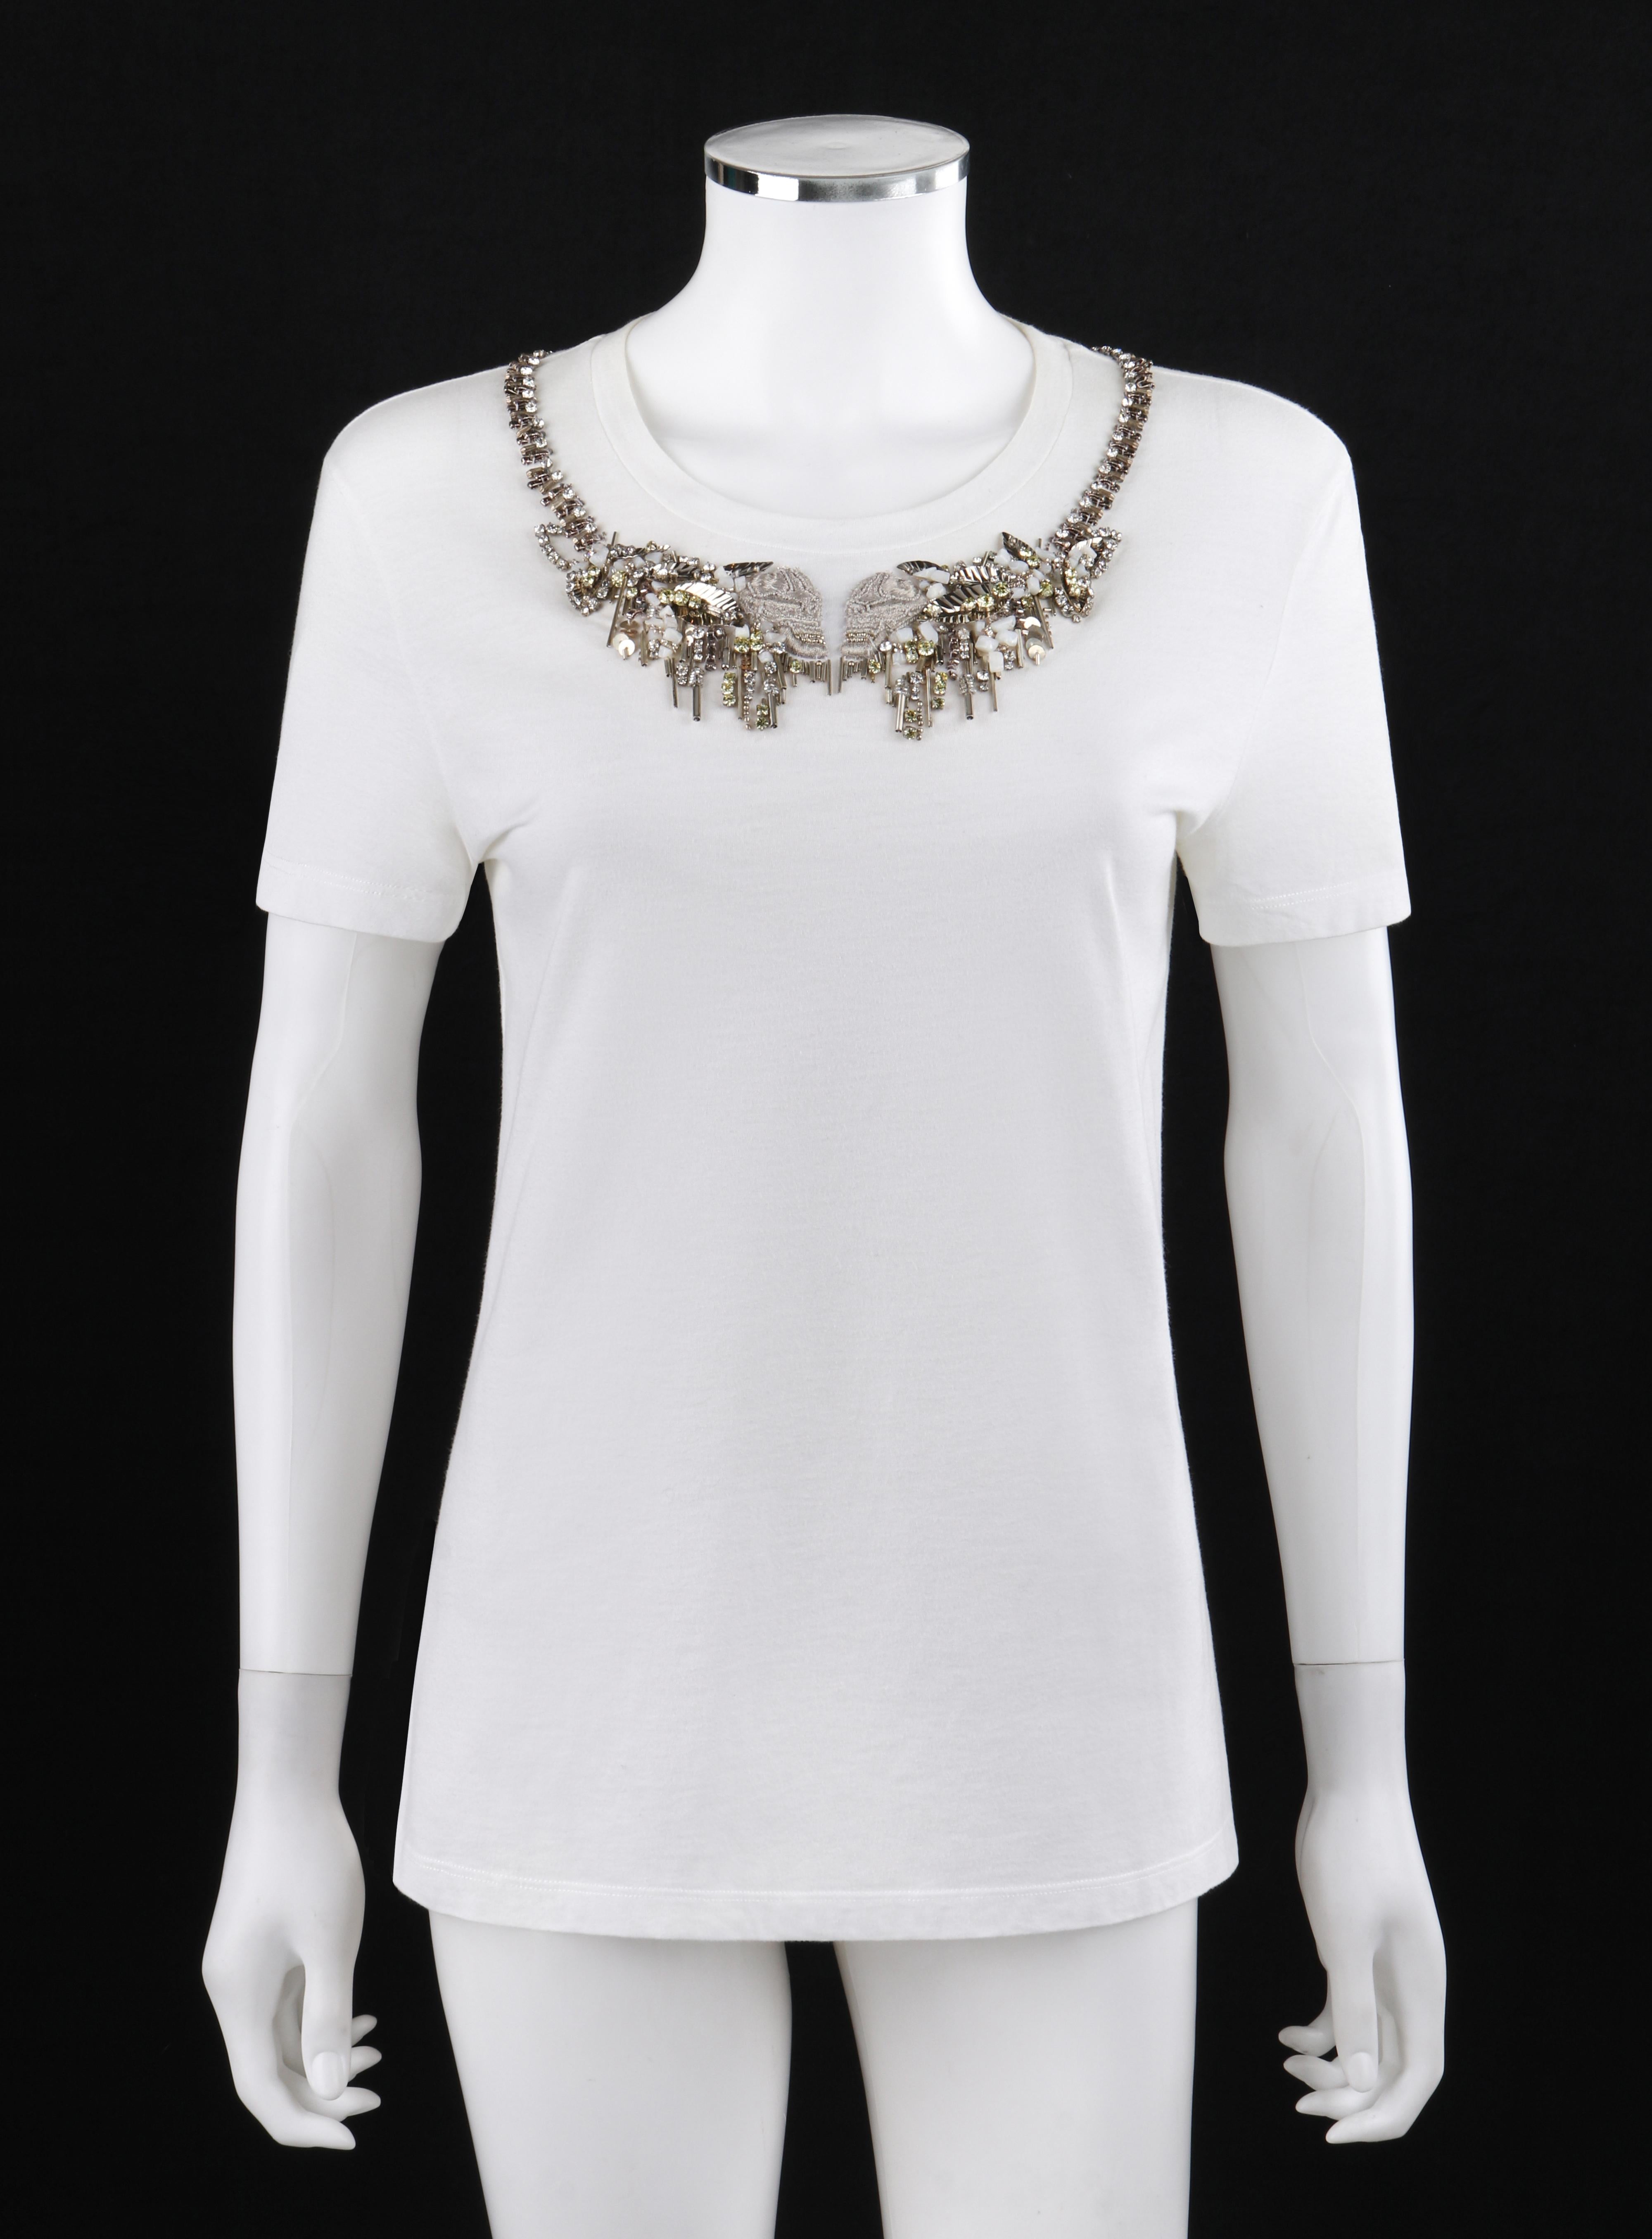 ALEXANDER McQUEEN A/W 2013 Skull Embroidered Beaded White Short Sleeve T-Shirt
 
Brand / Manufacturer: Alexander McQueen
Collection: A/W 2013
Style: T-shirt
Color(s): Shades of white and silver
Lined: No
Marked Fabric Content: 100% cotton